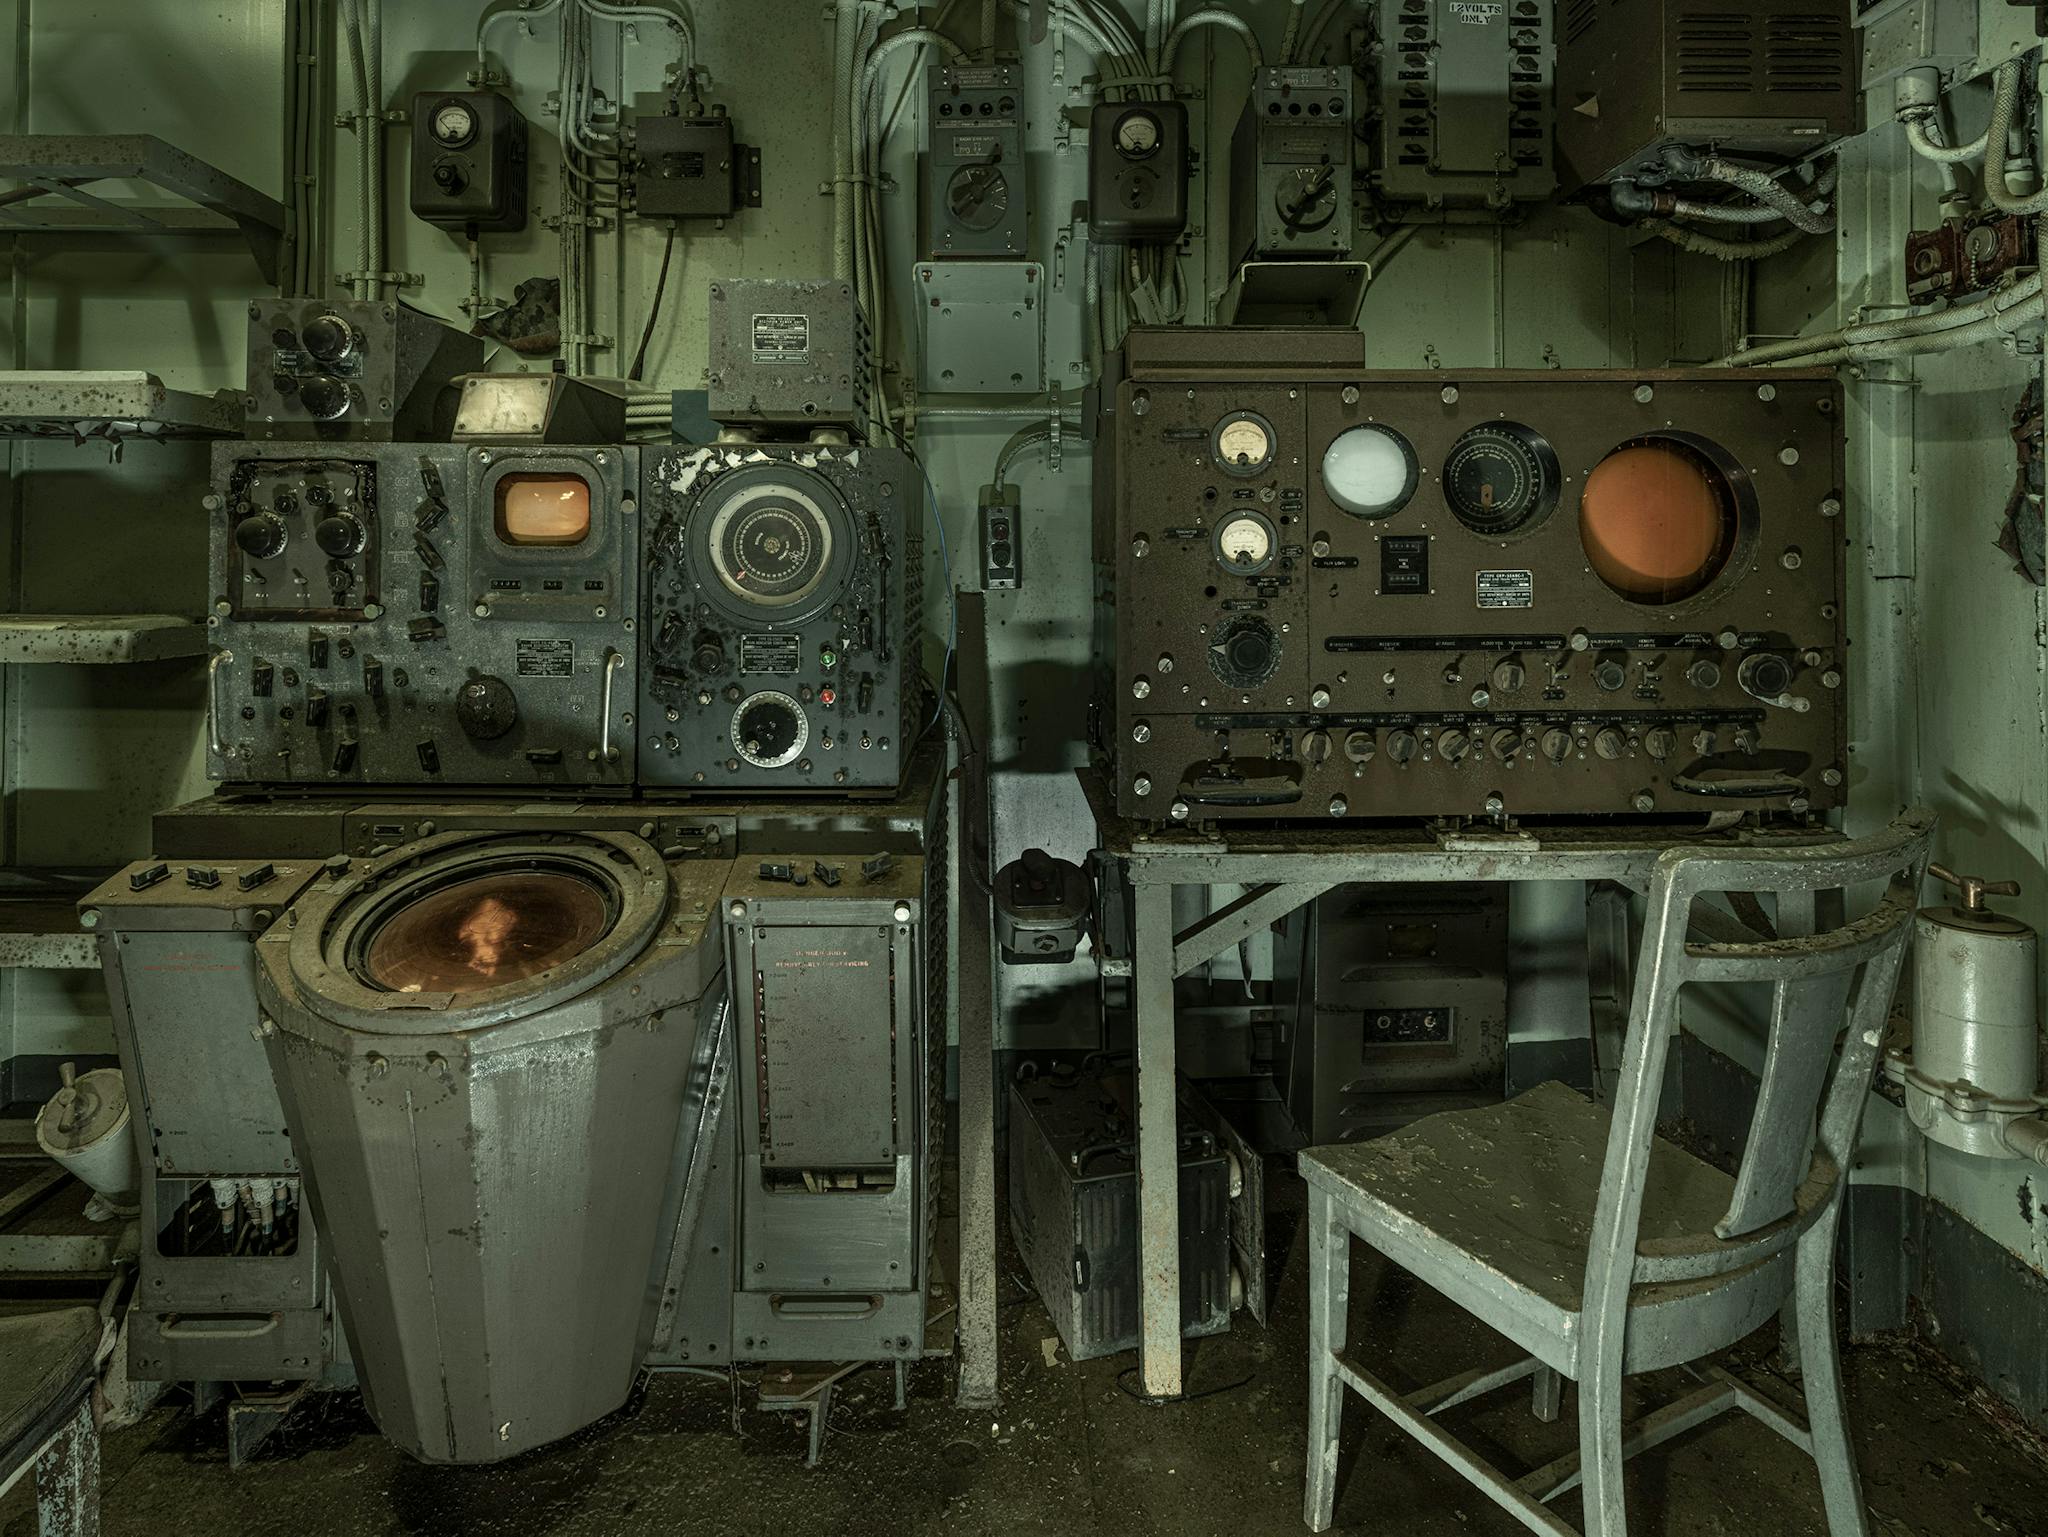 The radar room. The apparatus to the right is a surface search radar machine.